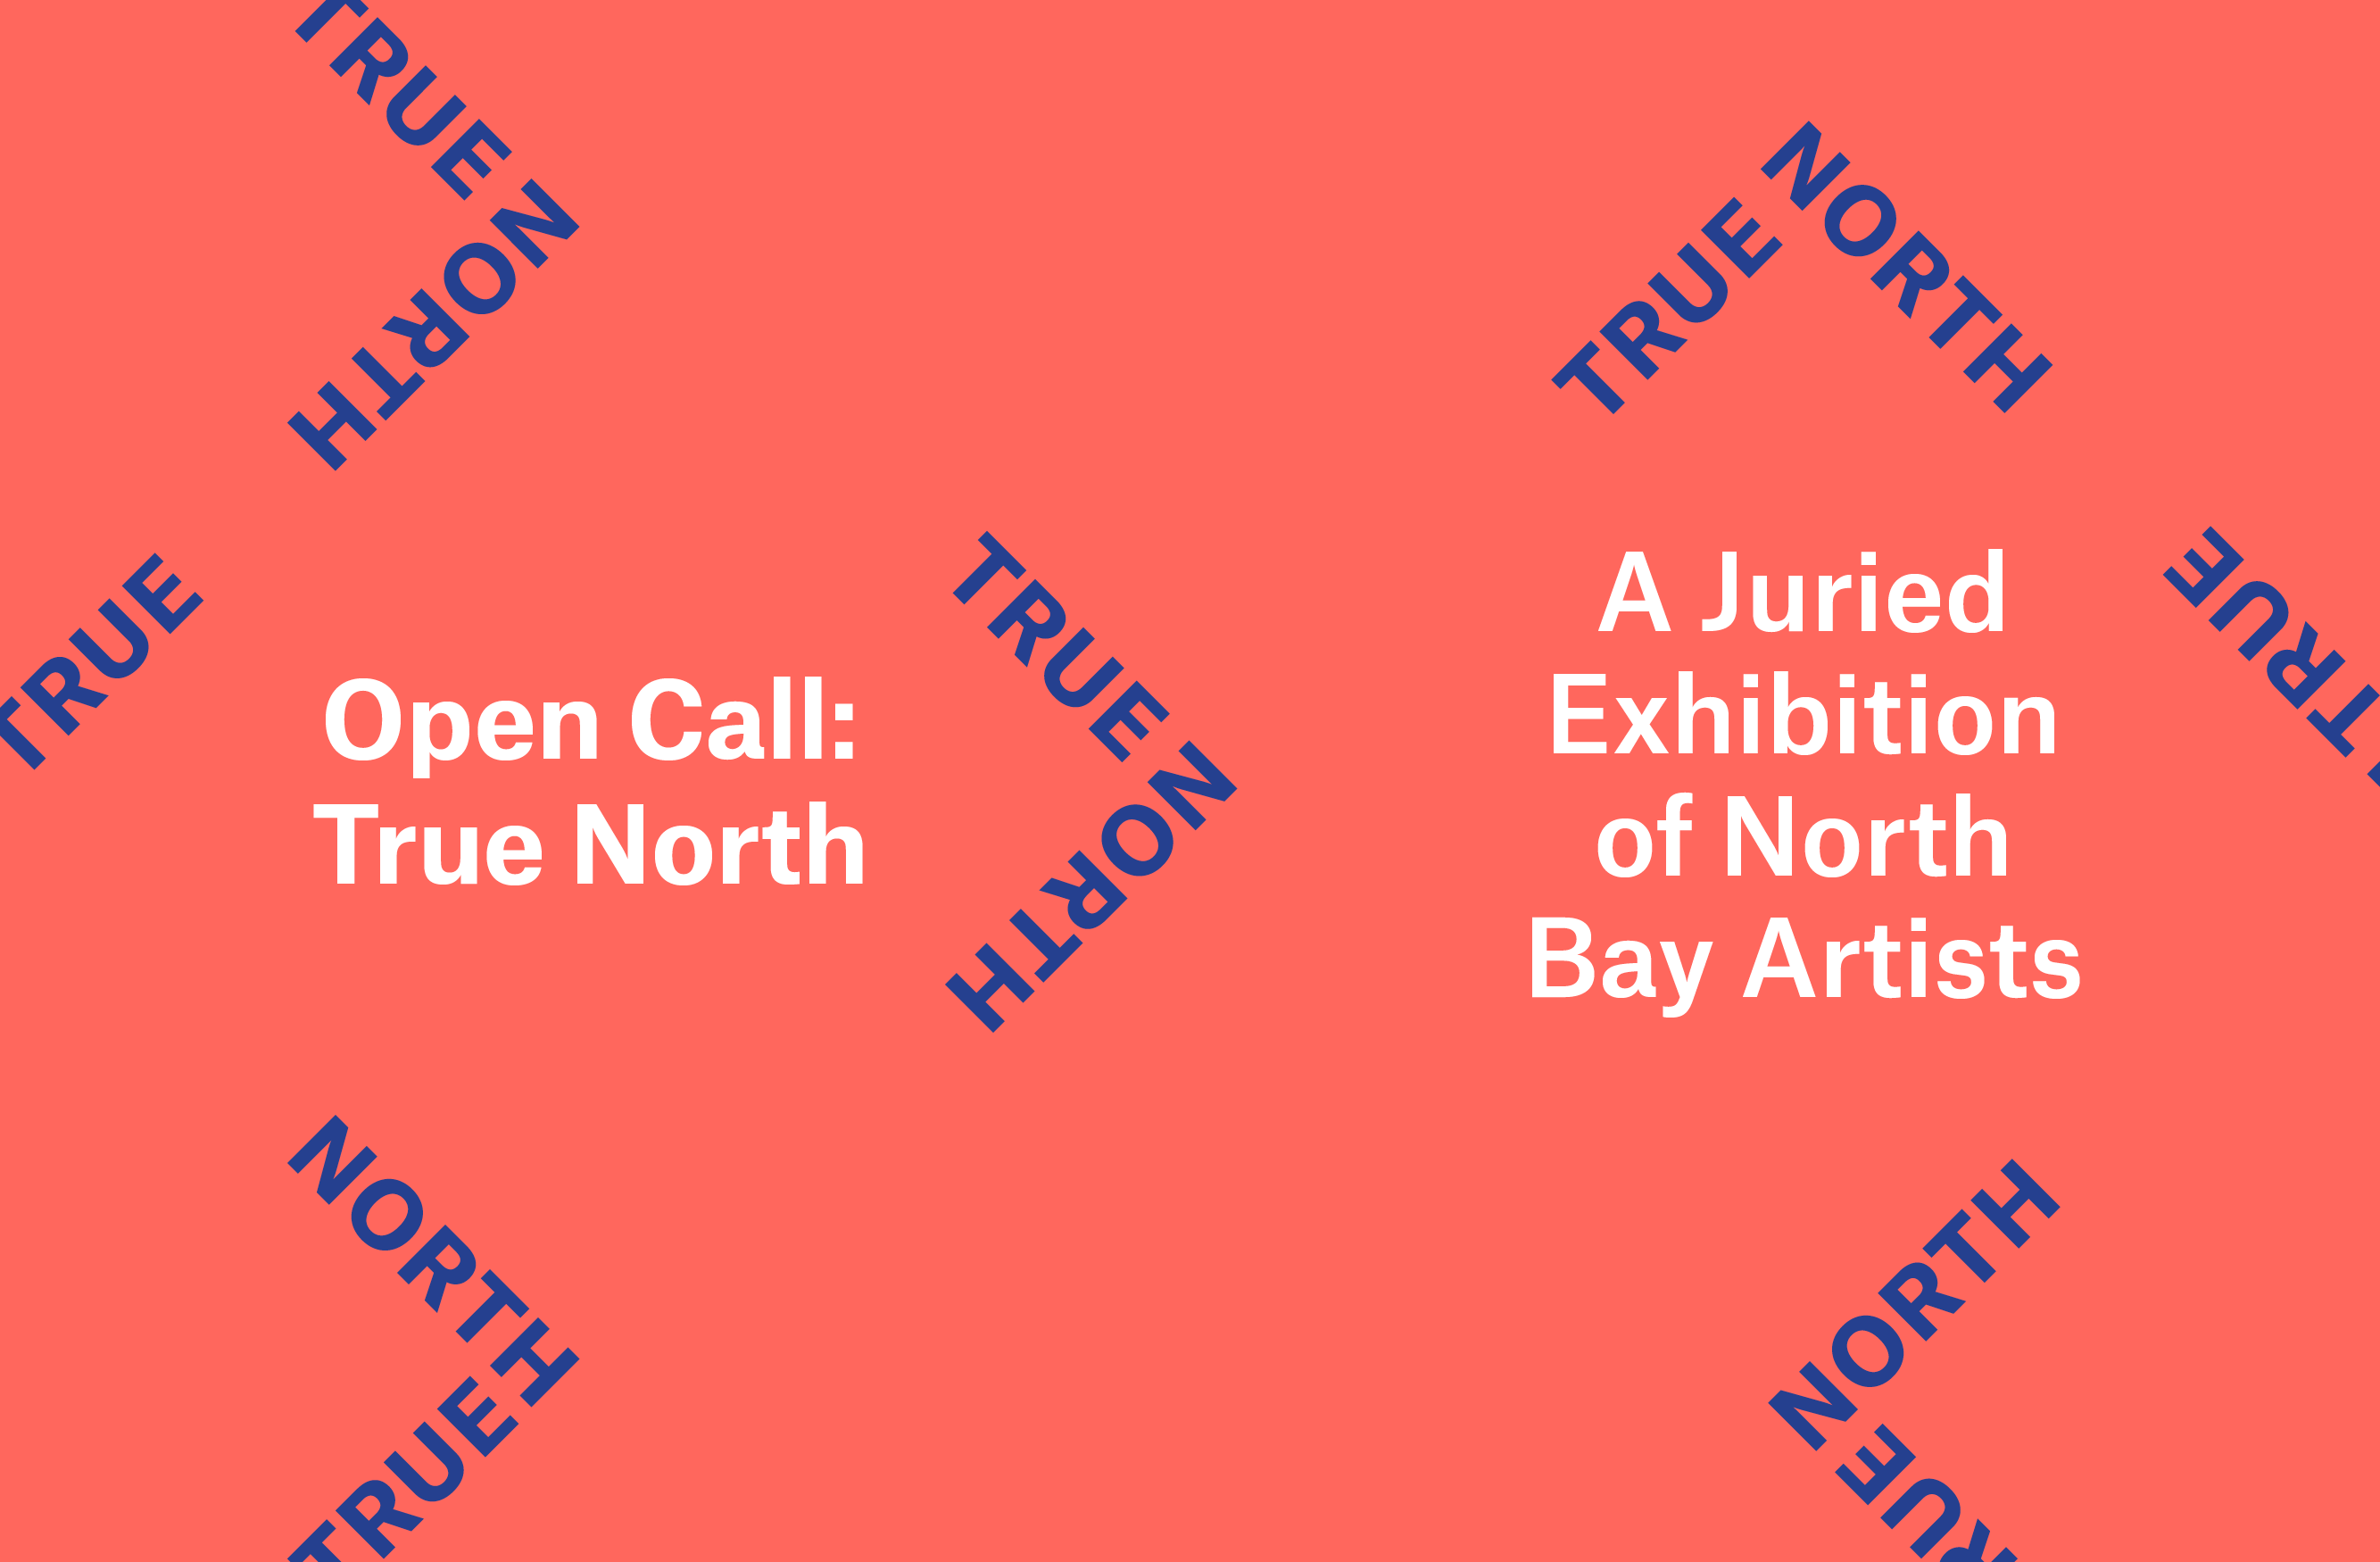 A graphic with blue text in a repeating pattern that reads "True North" and white text that reads "Open Call: True North A Juried Exhibition of North Bay Artists"